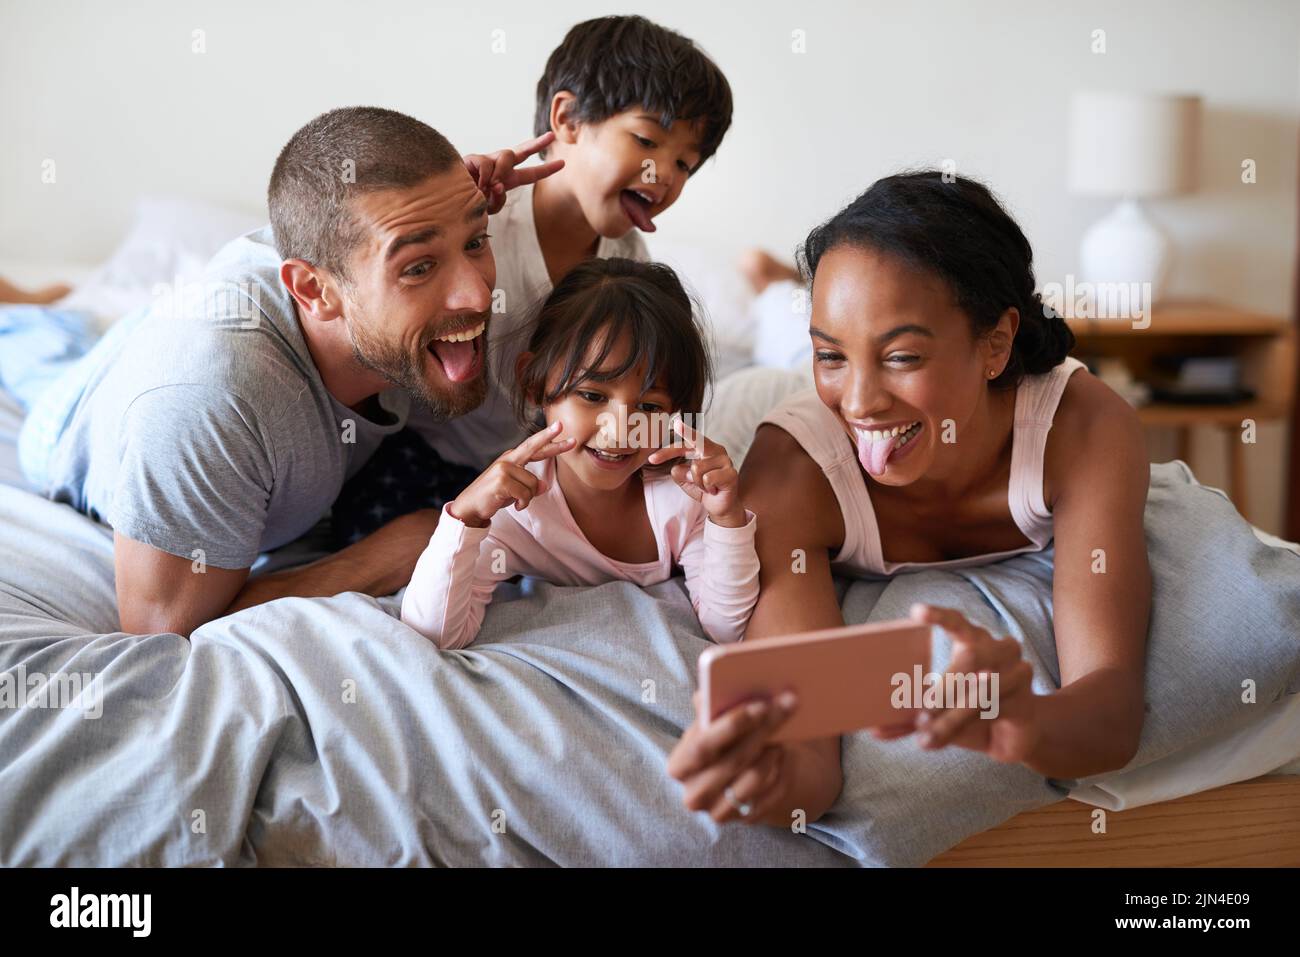 Silly faces and selfies in the morning. a beautiful young family of four taking a selfie with a cellphone in their bedroom at home. Stock Photo